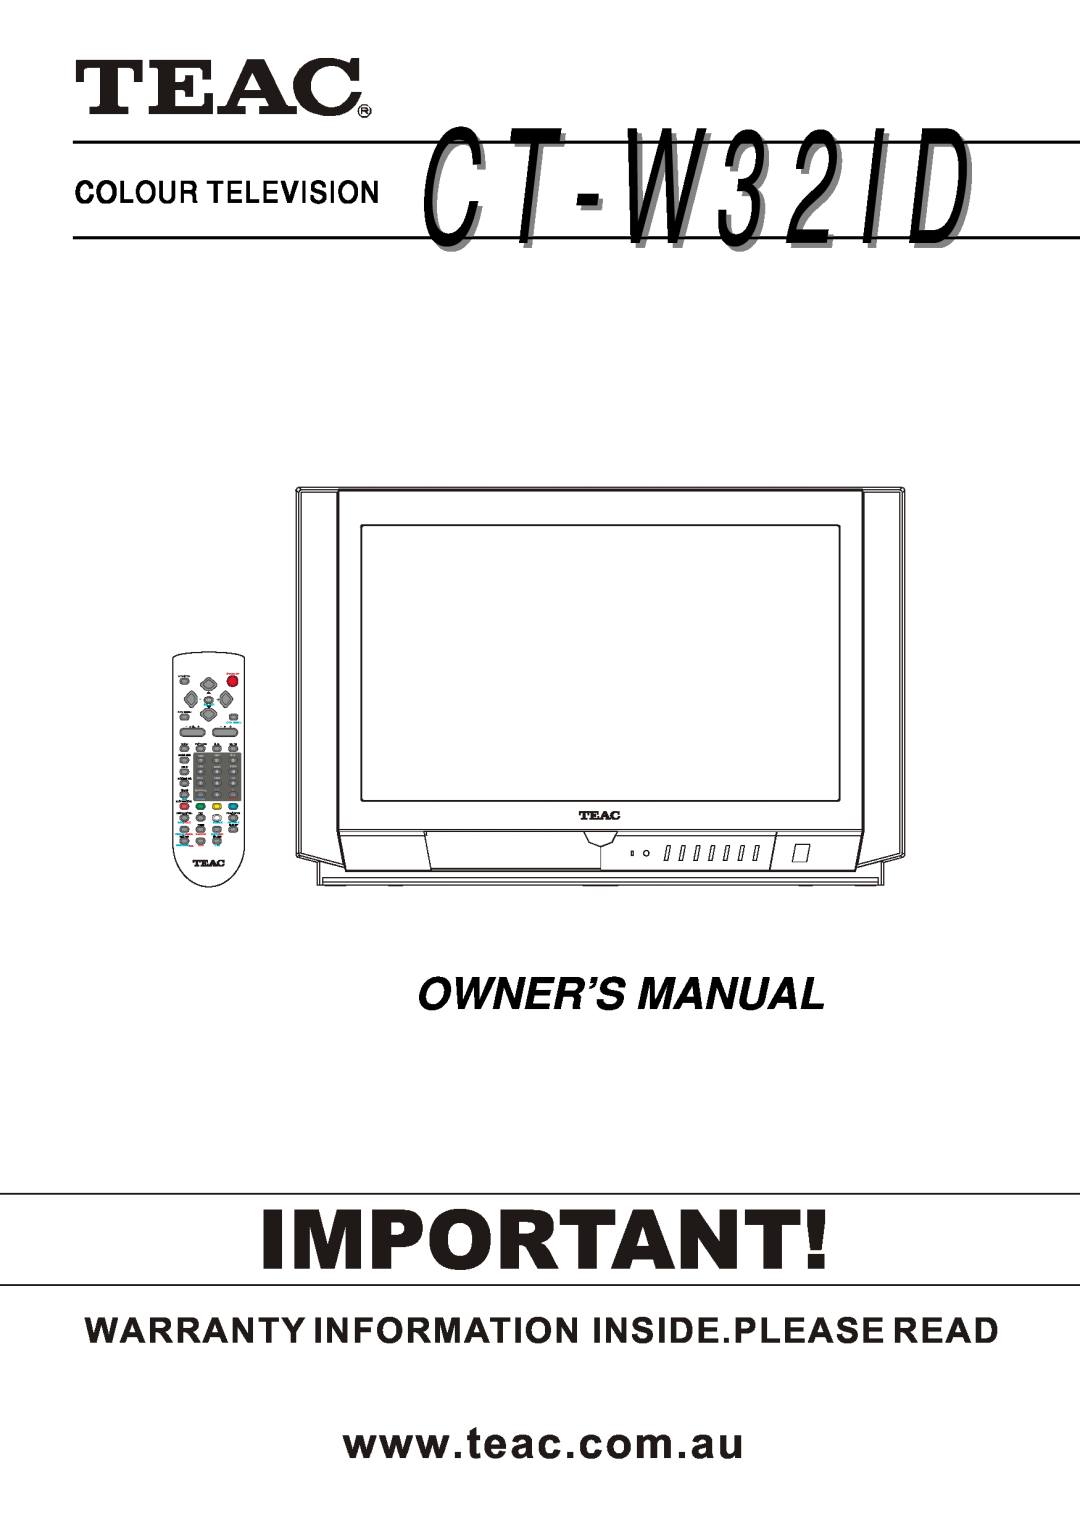 Teac owner manual Owner’S Manual, Warranty Information Inside.Please Read, COLOUR TELEVISION CT-W32ID, Standby, Atv/Dtv 